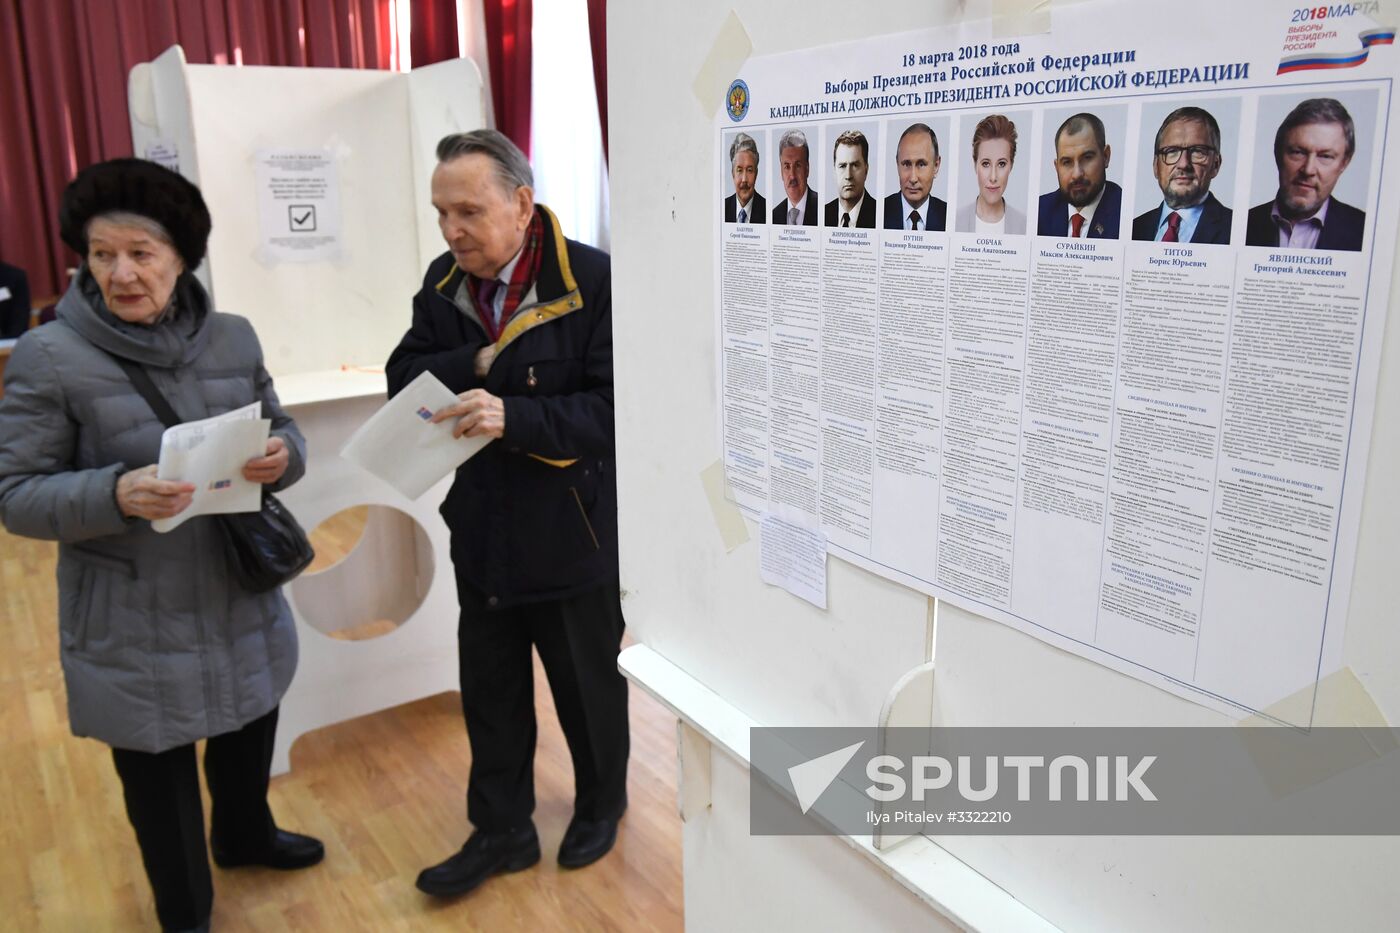 Russian presidential elections in Moscow